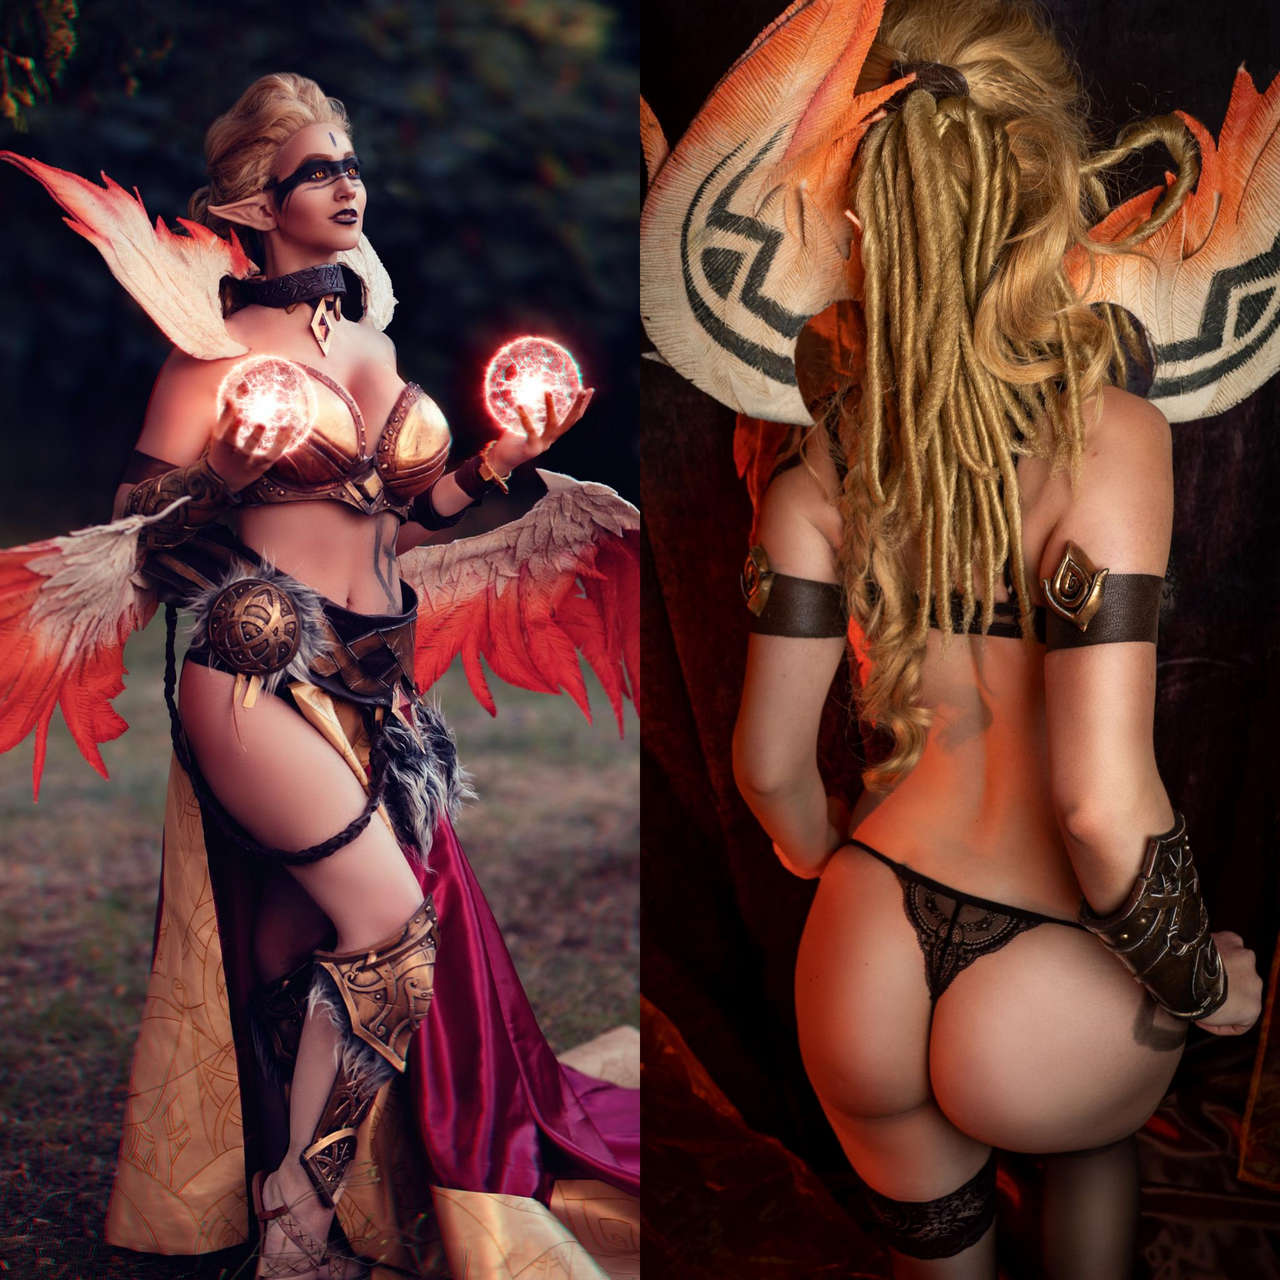 On Or Off Liensue As Exiled Morgana From League Of Legends Left Photo Made By Bcwphot